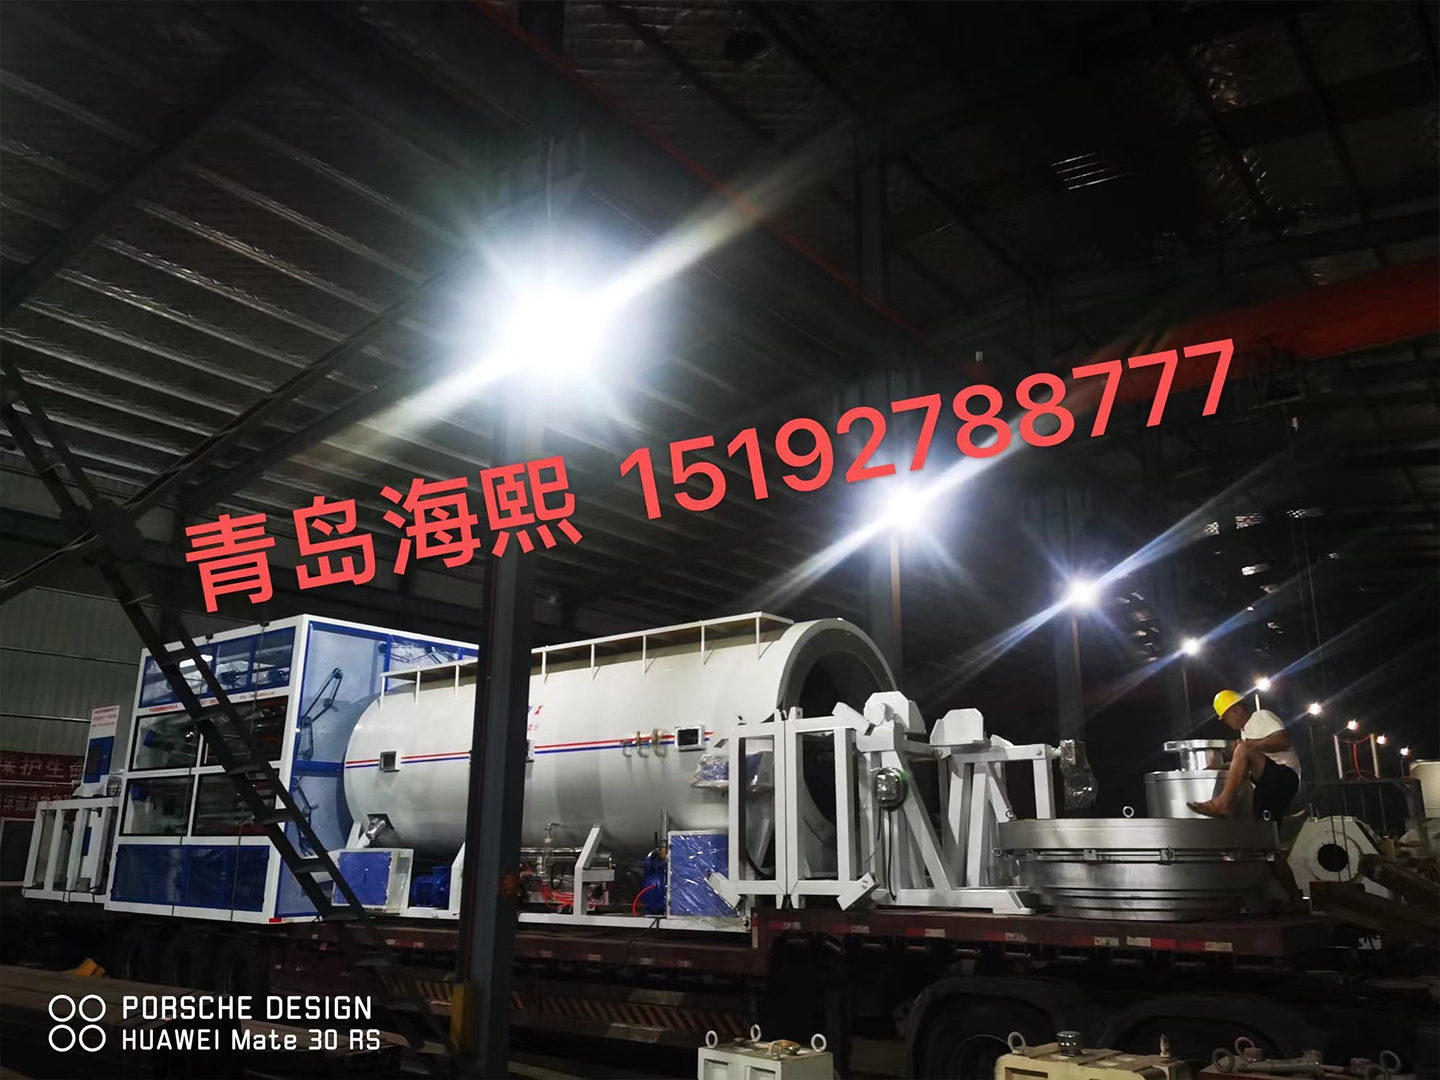 The first car of Yantai Yida Anticorrosion Insulation Material Co., Ltd.